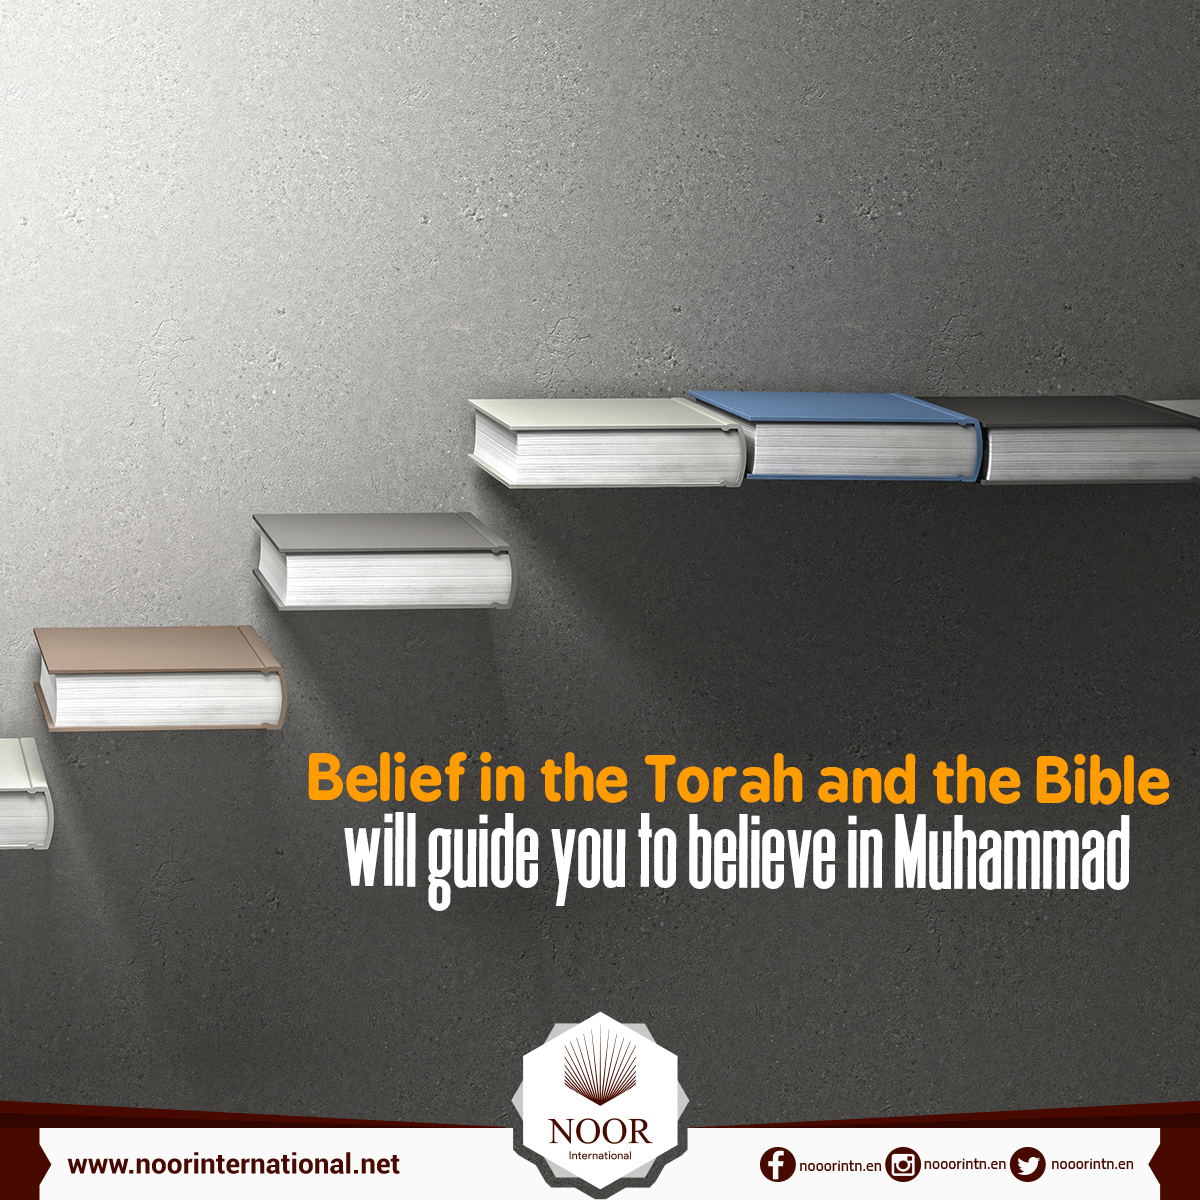 Belief in the Torah and the Bible will guide you to believe in Muhammad